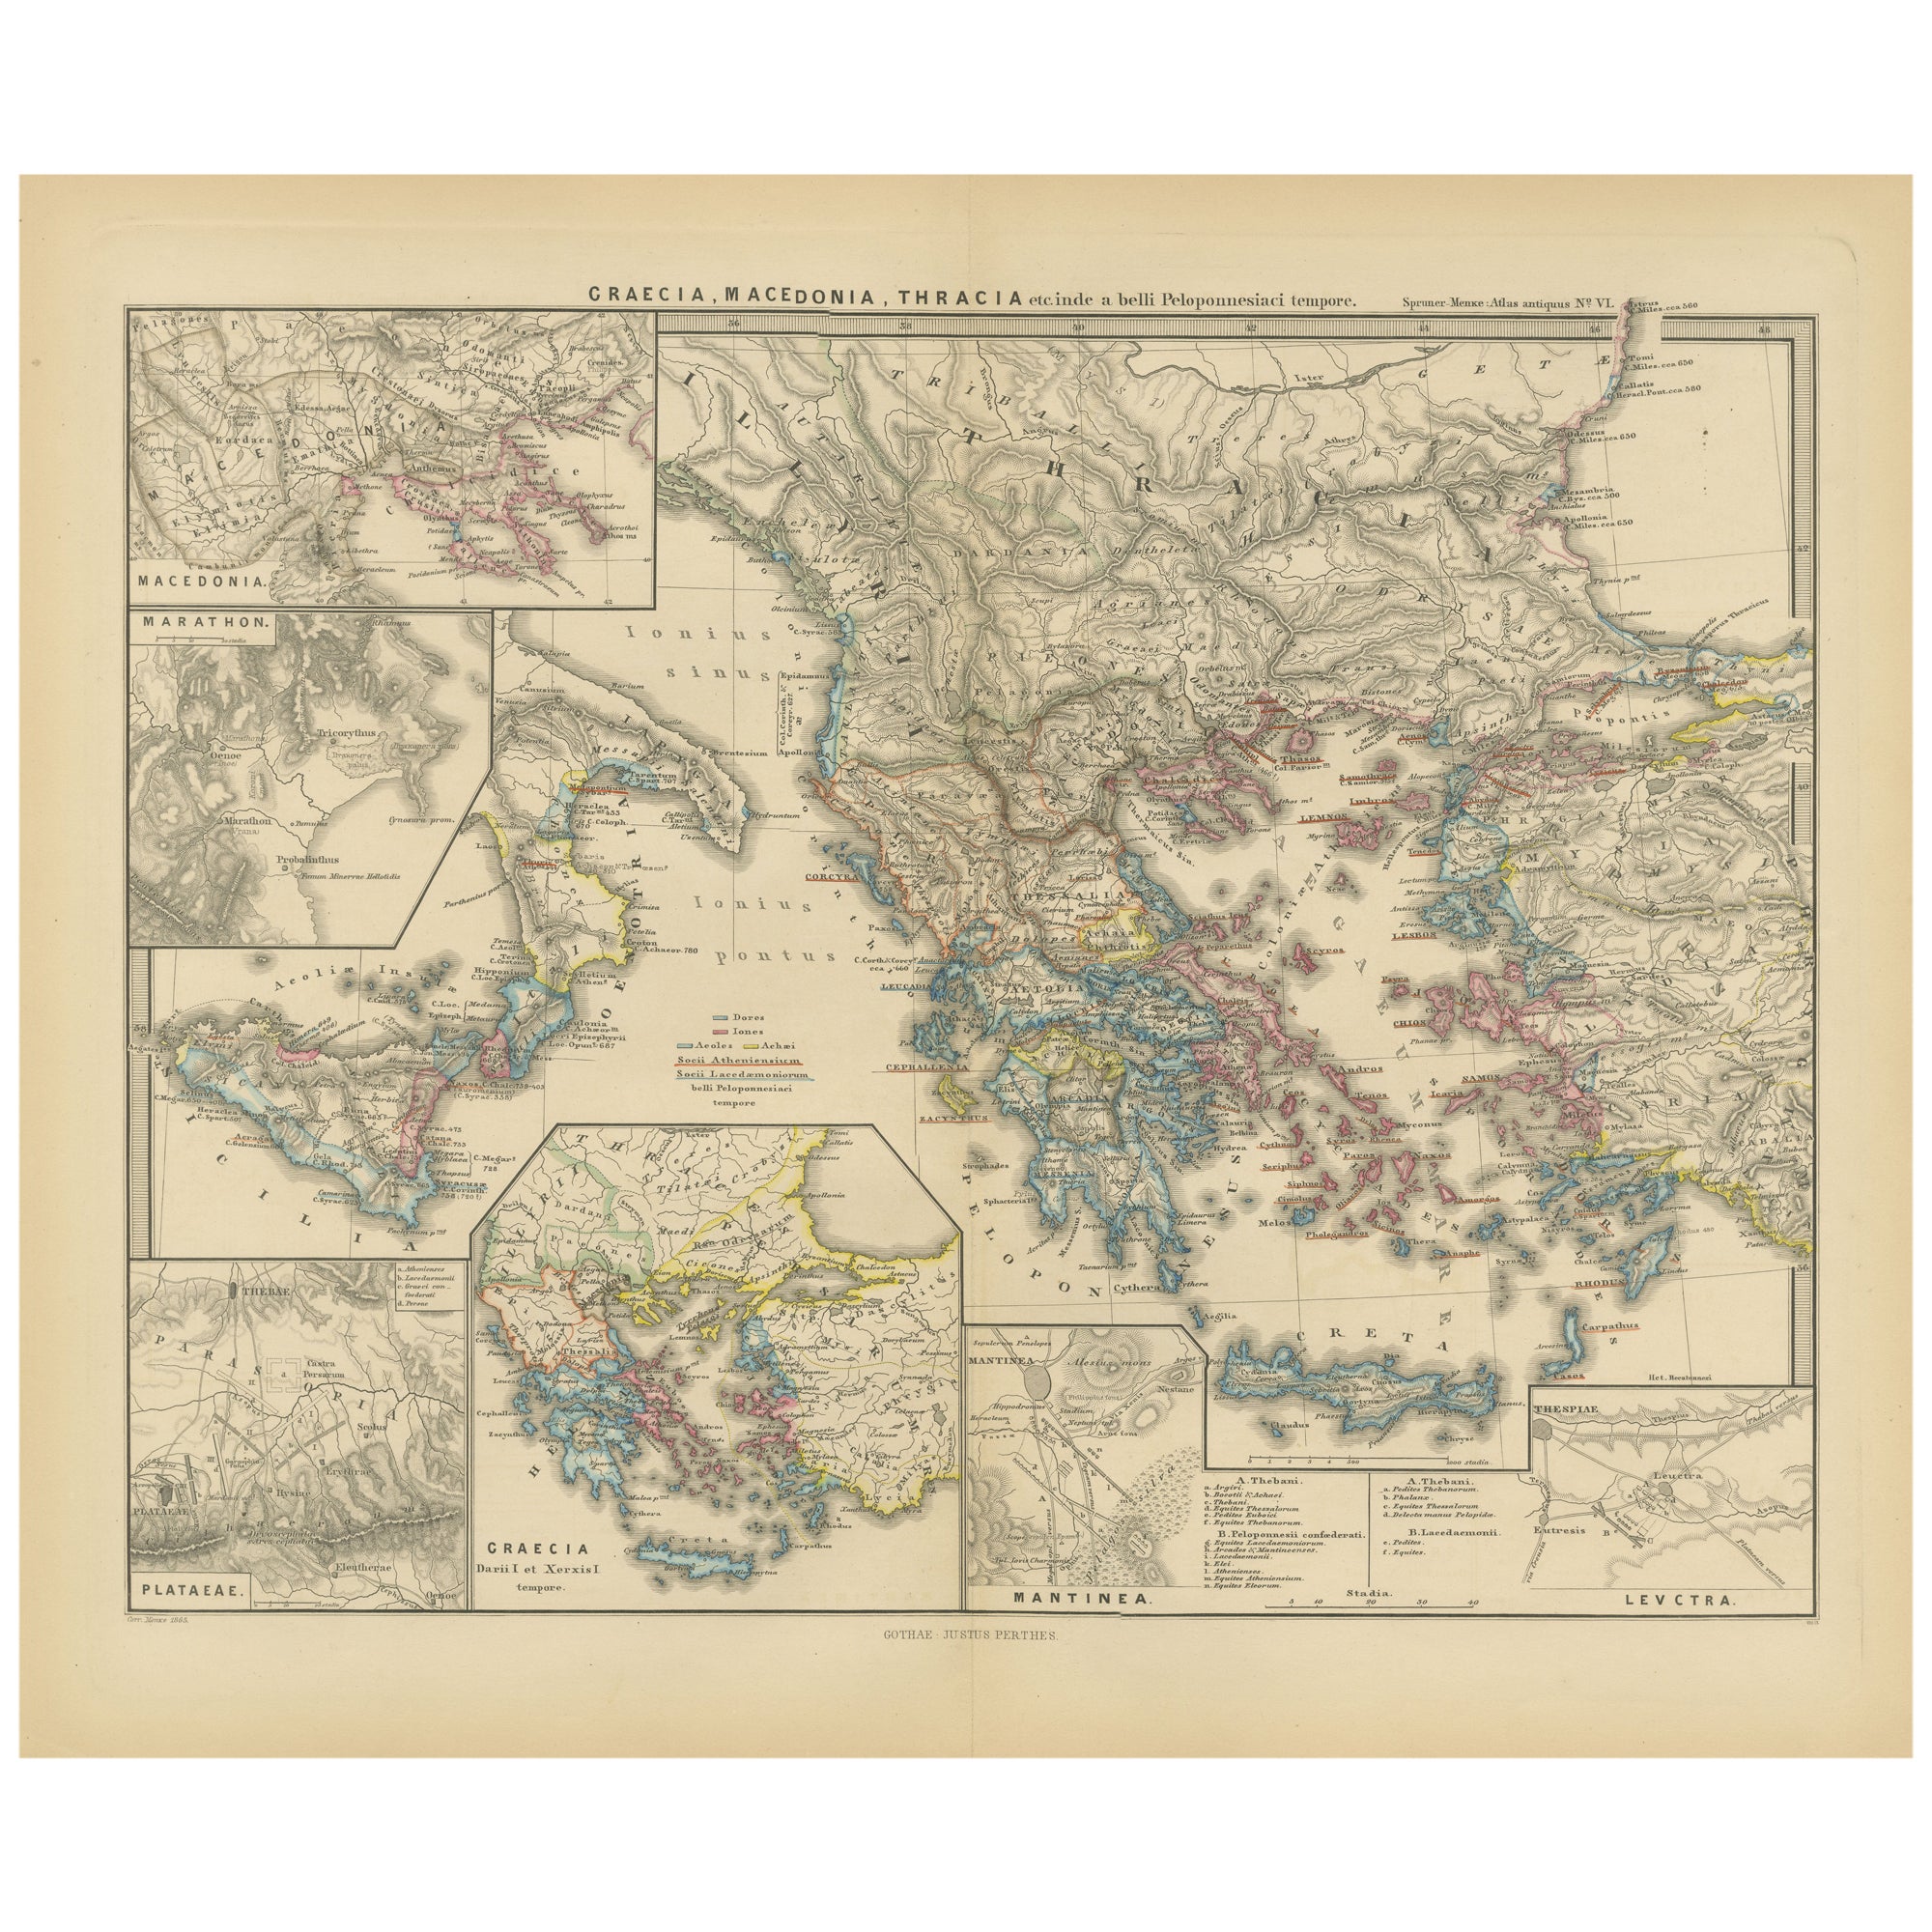 Map of Greece, Macedonia, Thrace from the time of the Peloponnesian War, 1880 For Sale